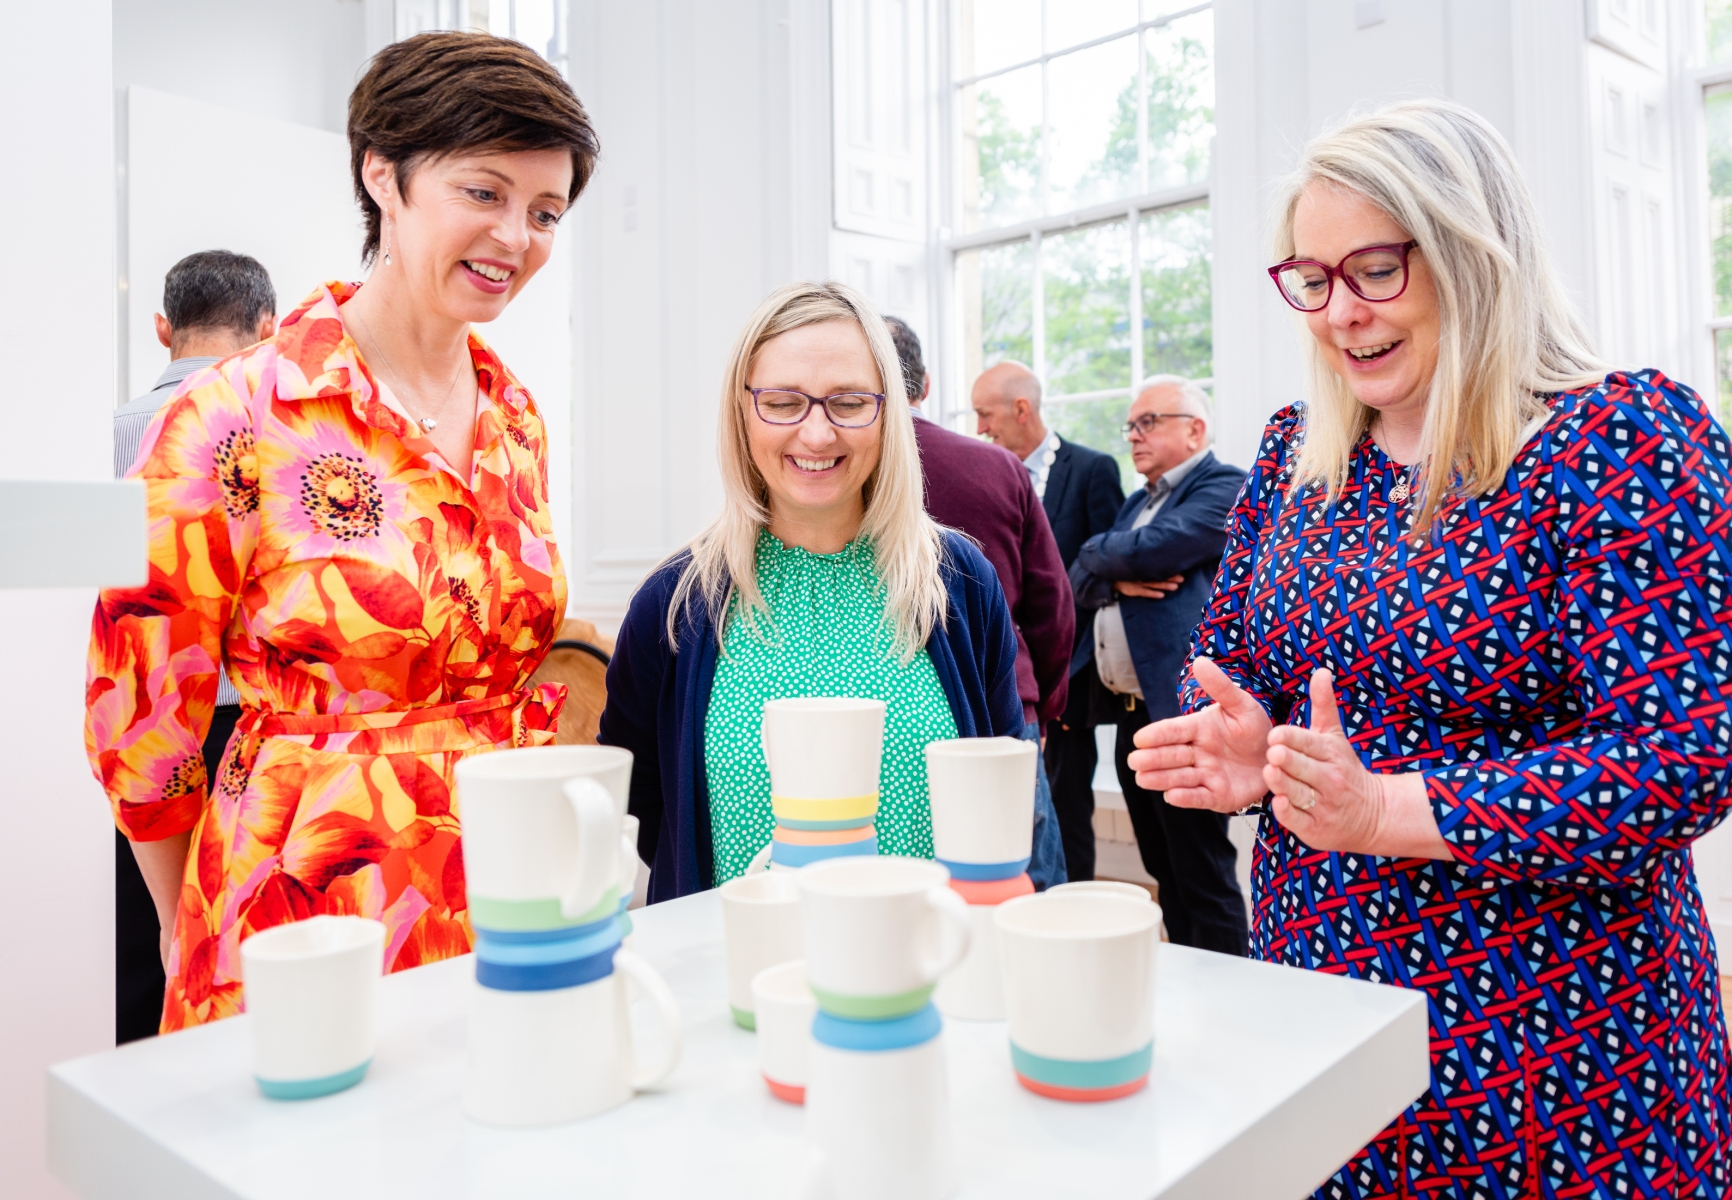 Katherine-Collins-Creative-Waterford-Coordinator-with-Jacqui-Gaule-Waterford-LEO-and-Dr-Audrey-Whitty-Deputy-Director-National-Museum-of-Ireland